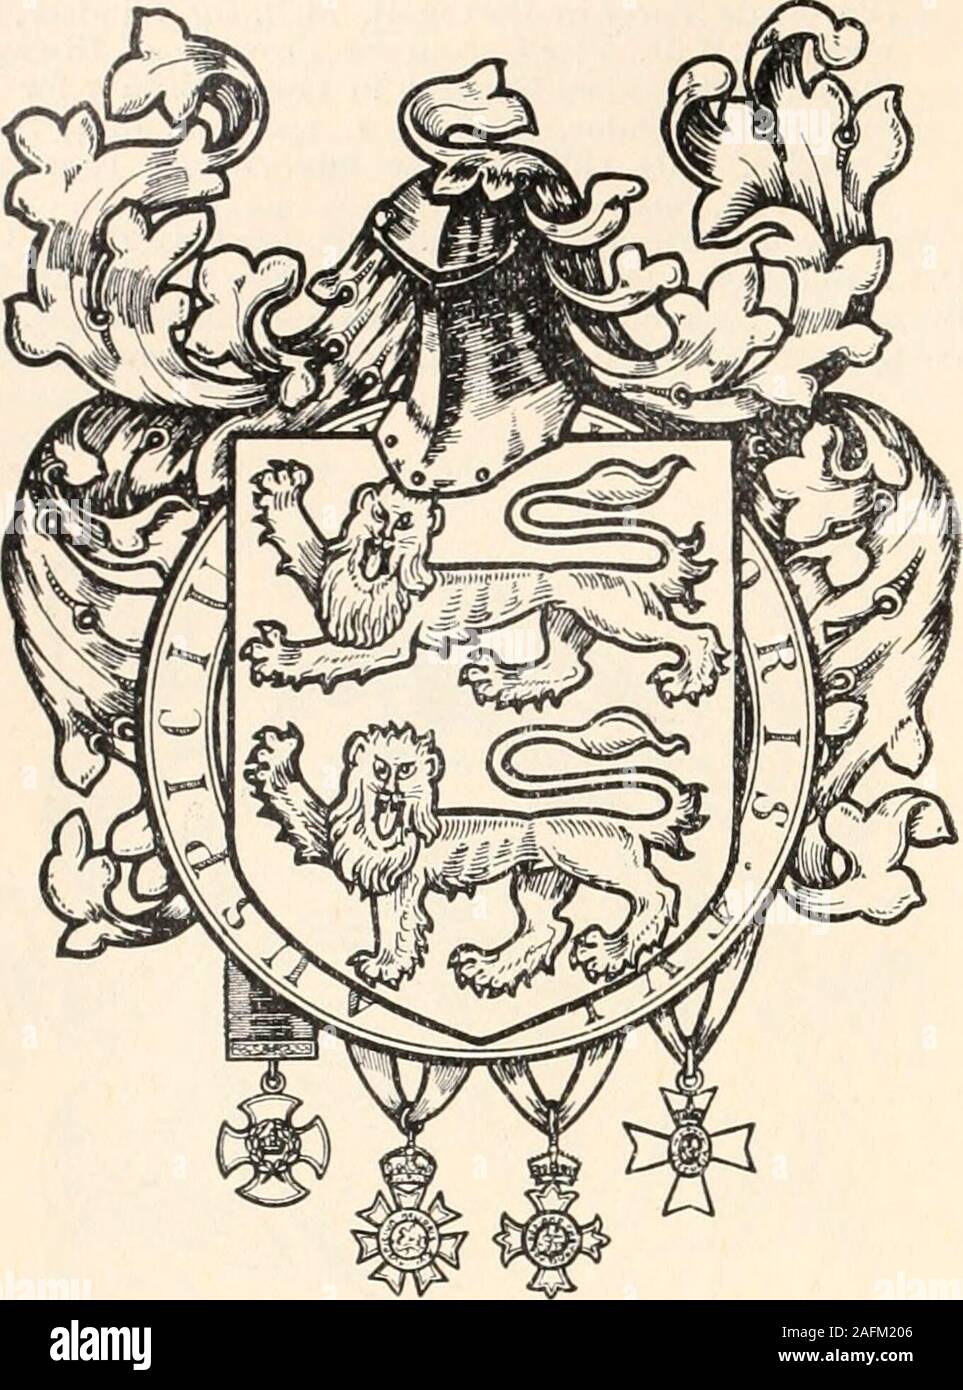 . Armorial families : a directory of gentlemen of coat-armour. ; m. 1896, Lady Grace Murray, .M.B.E. (1919),d. of Rt. Hon. 7th Earl of Dunmore; and has issue—Gerald Barry, M.C, Capt. late Coldstream Gds., served(ireat War 1914-18, *. 1896 i. T923, Lady MargaretPleydell Bouverie, and has issue—.Anne]; Hubert Wynd-ham Barry, Lieut, (ret) R.N., served Great War 1914-18,*. 1898; Esther loyce ; and Nancy Elizabeth. Seat—Witchingham Hall, Norwich. Stanley Leonard Barry, Esq., C.M.G., C.B.E., D.S.O.,M.V.O., Major late loth Hussars, and Col. T. A., a memberof H.Ms. Bodyguard, Hon. Corps of Gentlem n-a Stock Photo